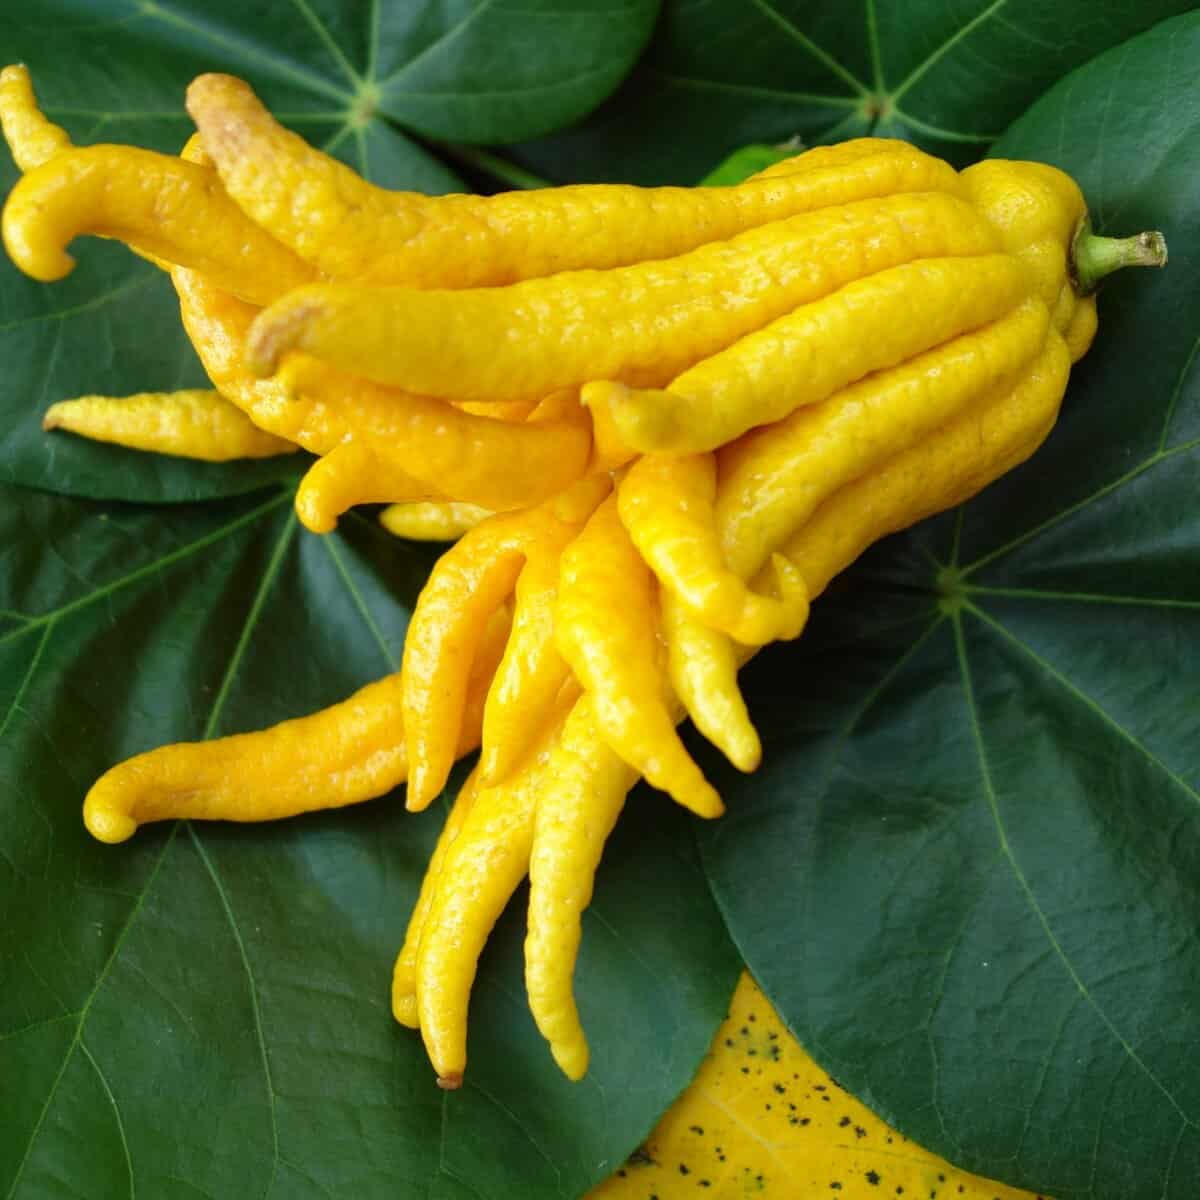 What is the buddha's hand citrus